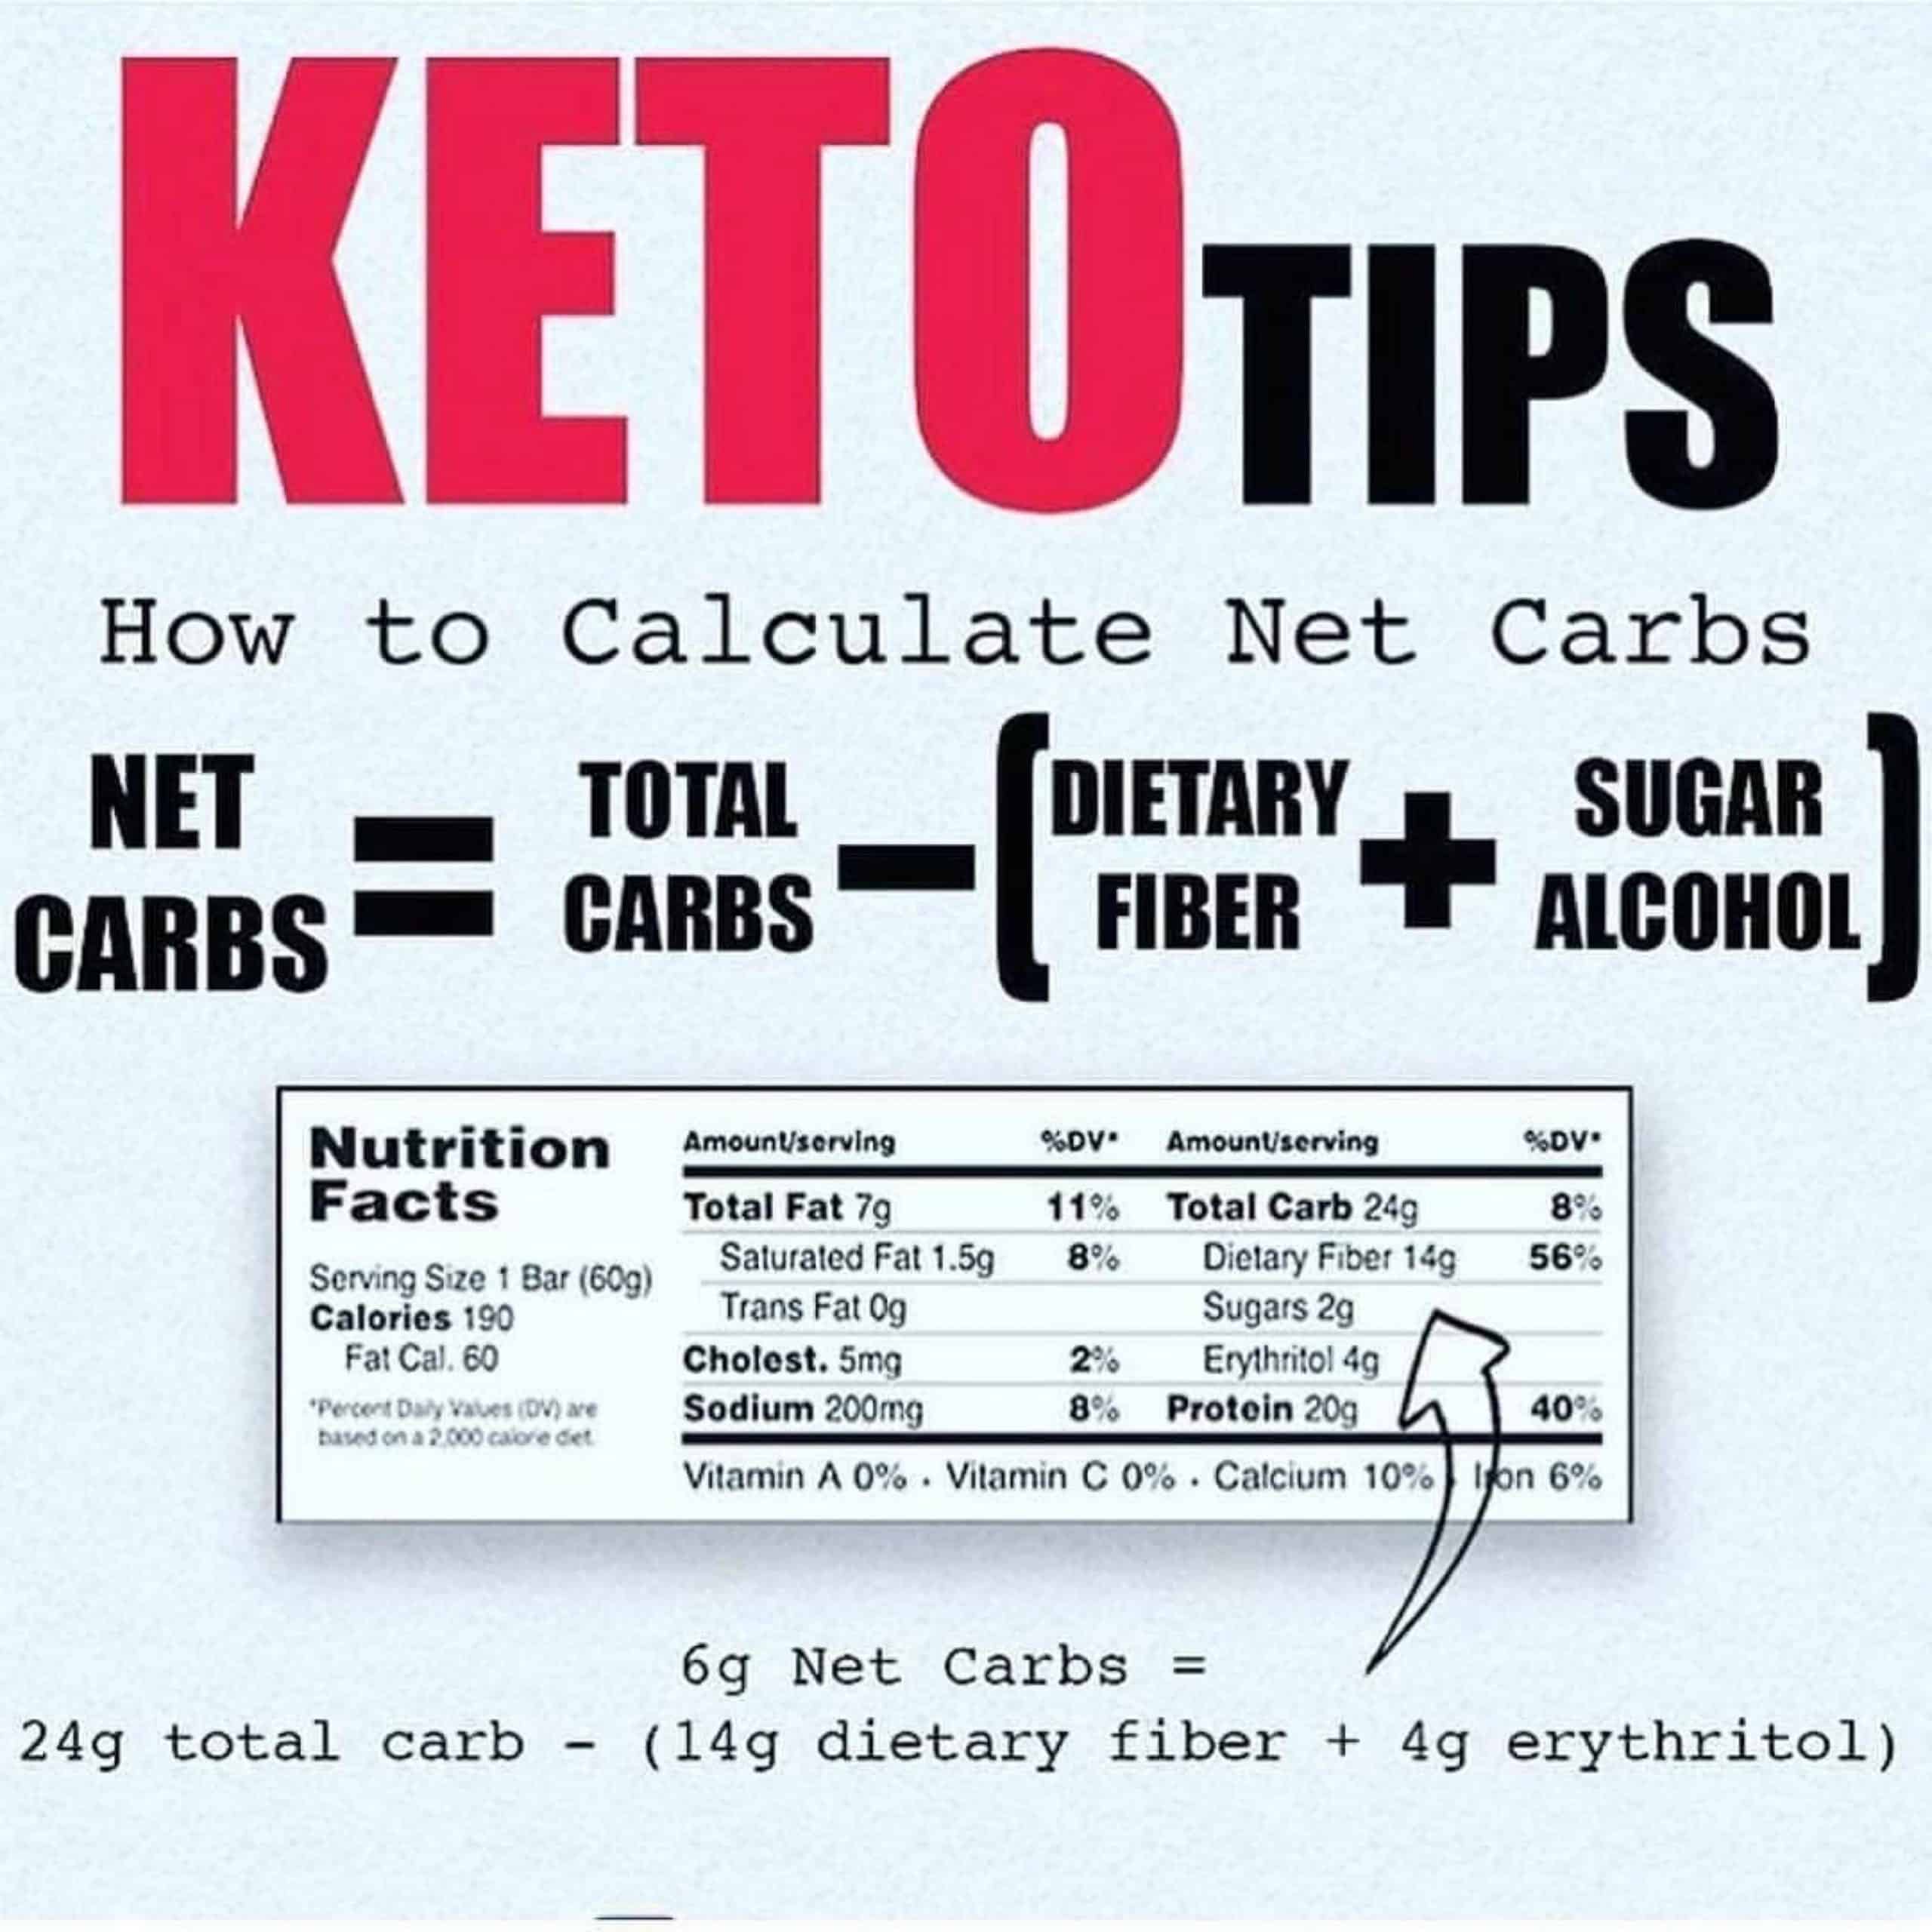 Learn how to calculate the net carbs in your food. : veganketo